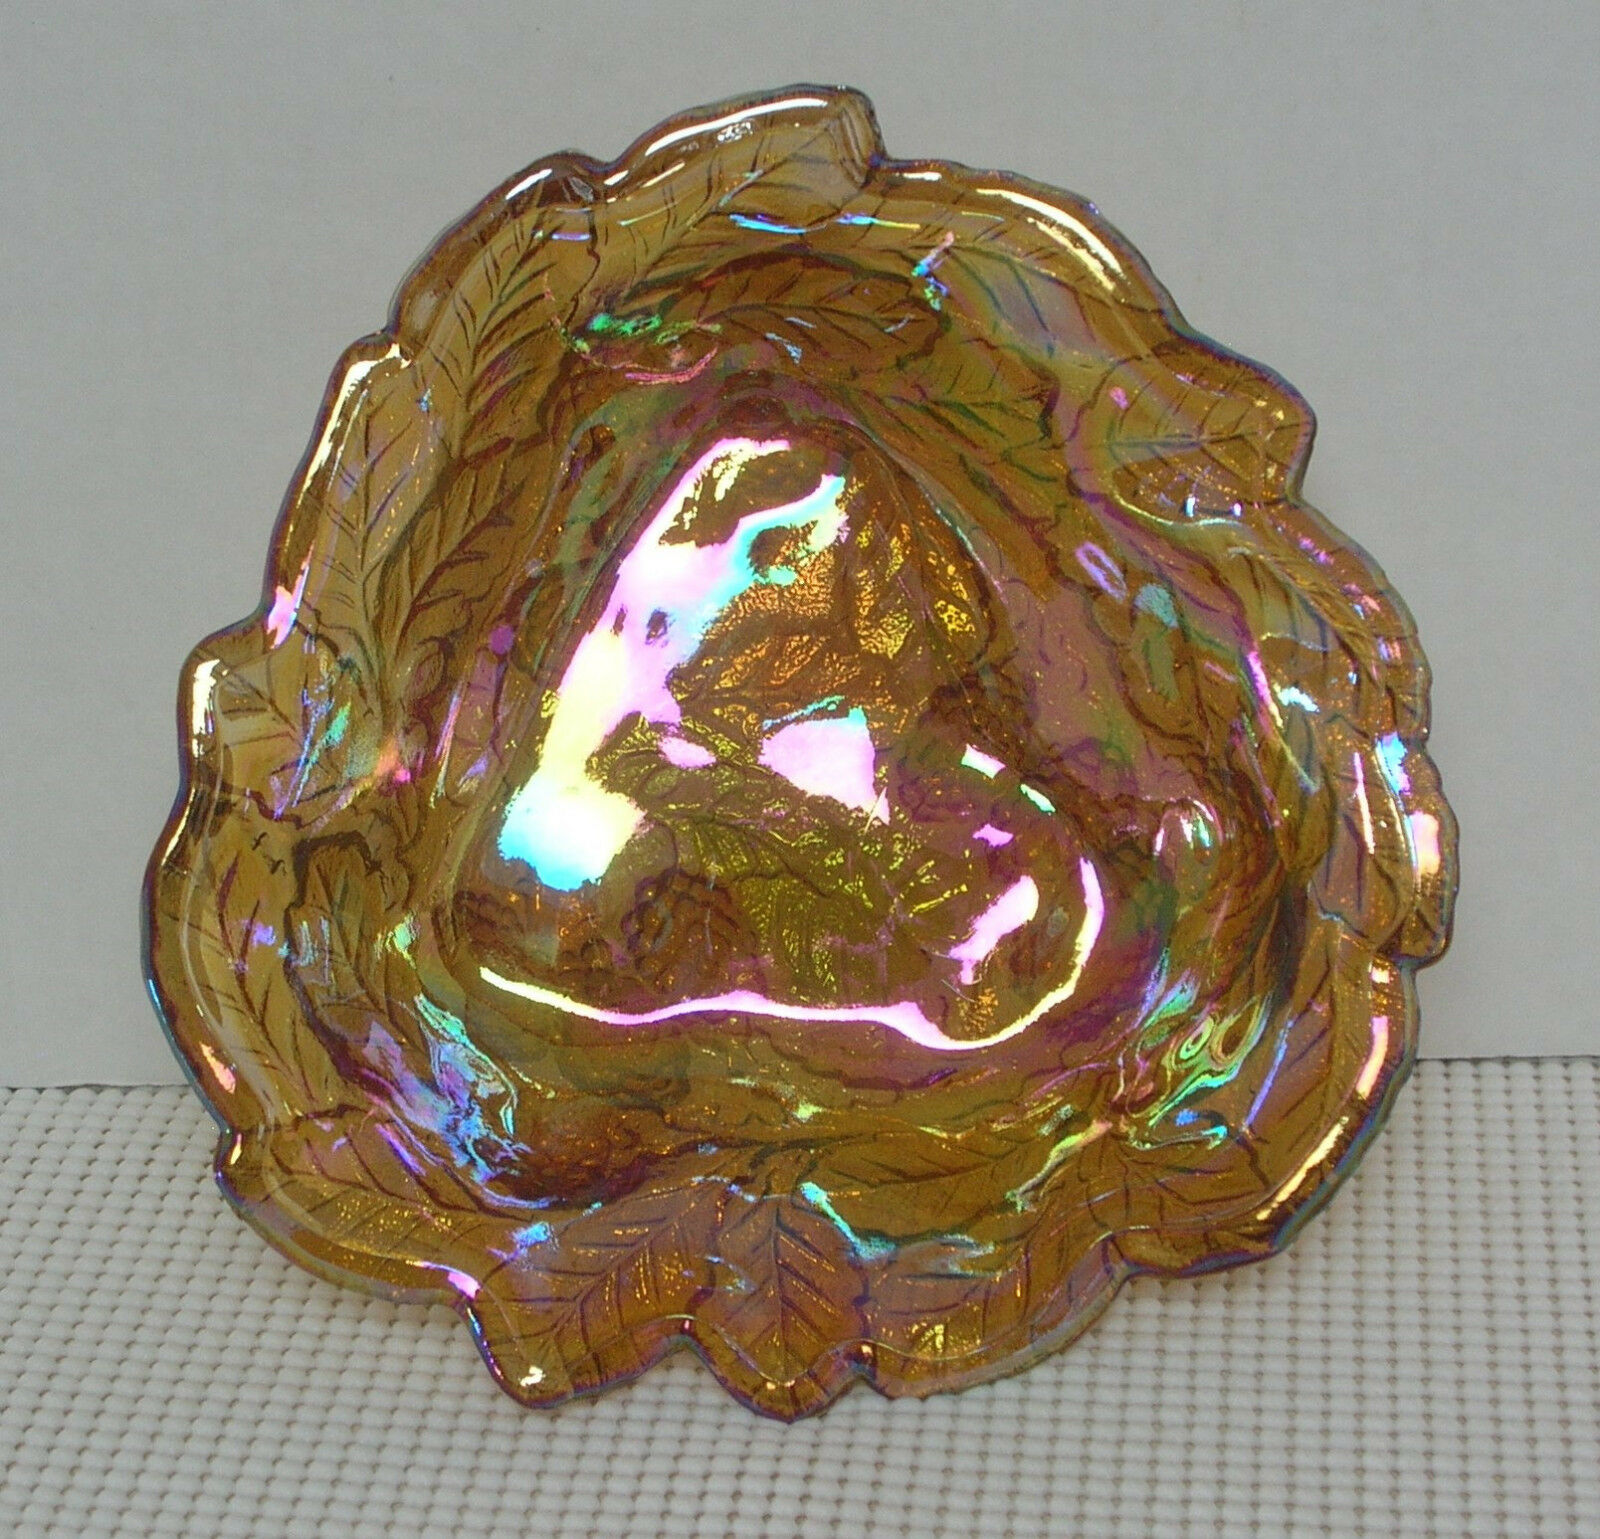 Vint Amber Carnival Glass Candy Nut Dish Marigold Bowl Grapes Leaves Irridescent